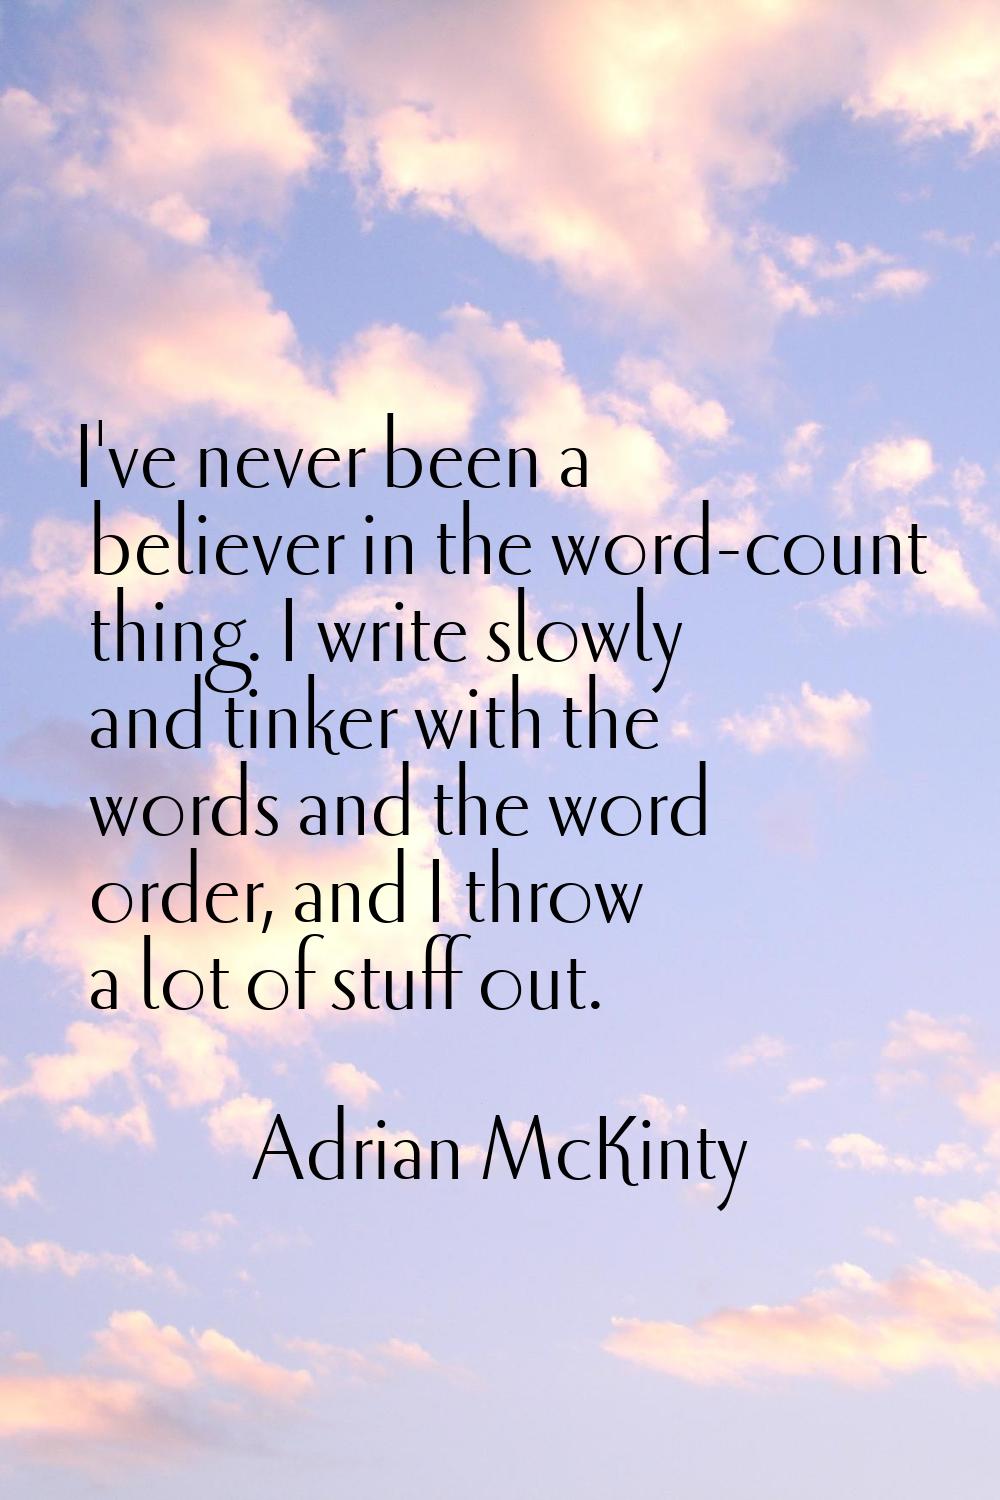 I've never been a believer in the word-count thing. I write slowly and tinker with the words and th